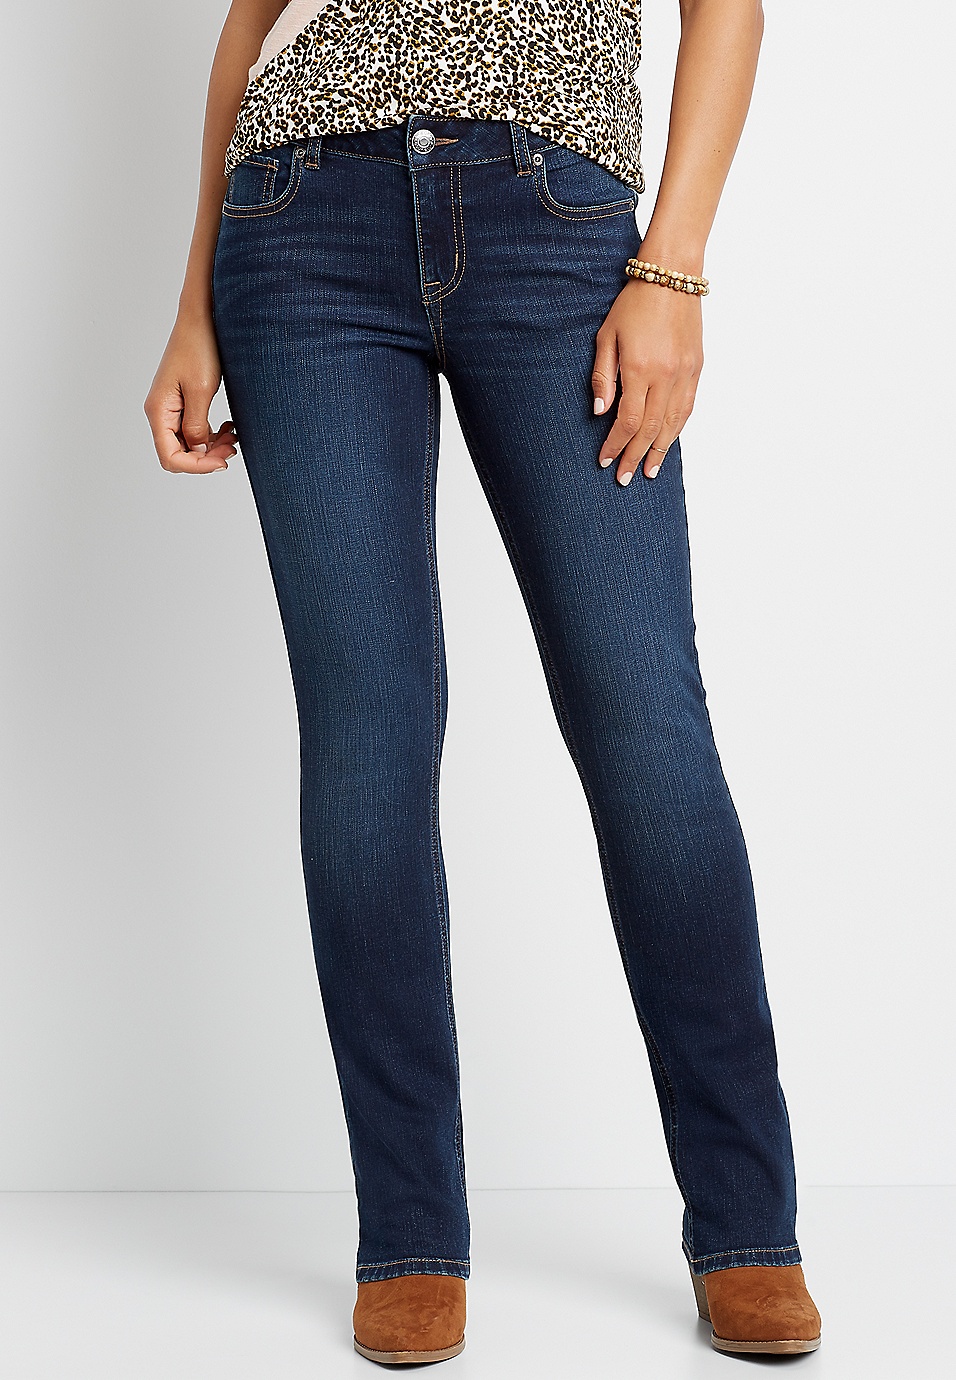 Aanvulling paneel Schipbreuk m jeans by maurices™ Classic Slim Boot Mid Rise Jean | maurices